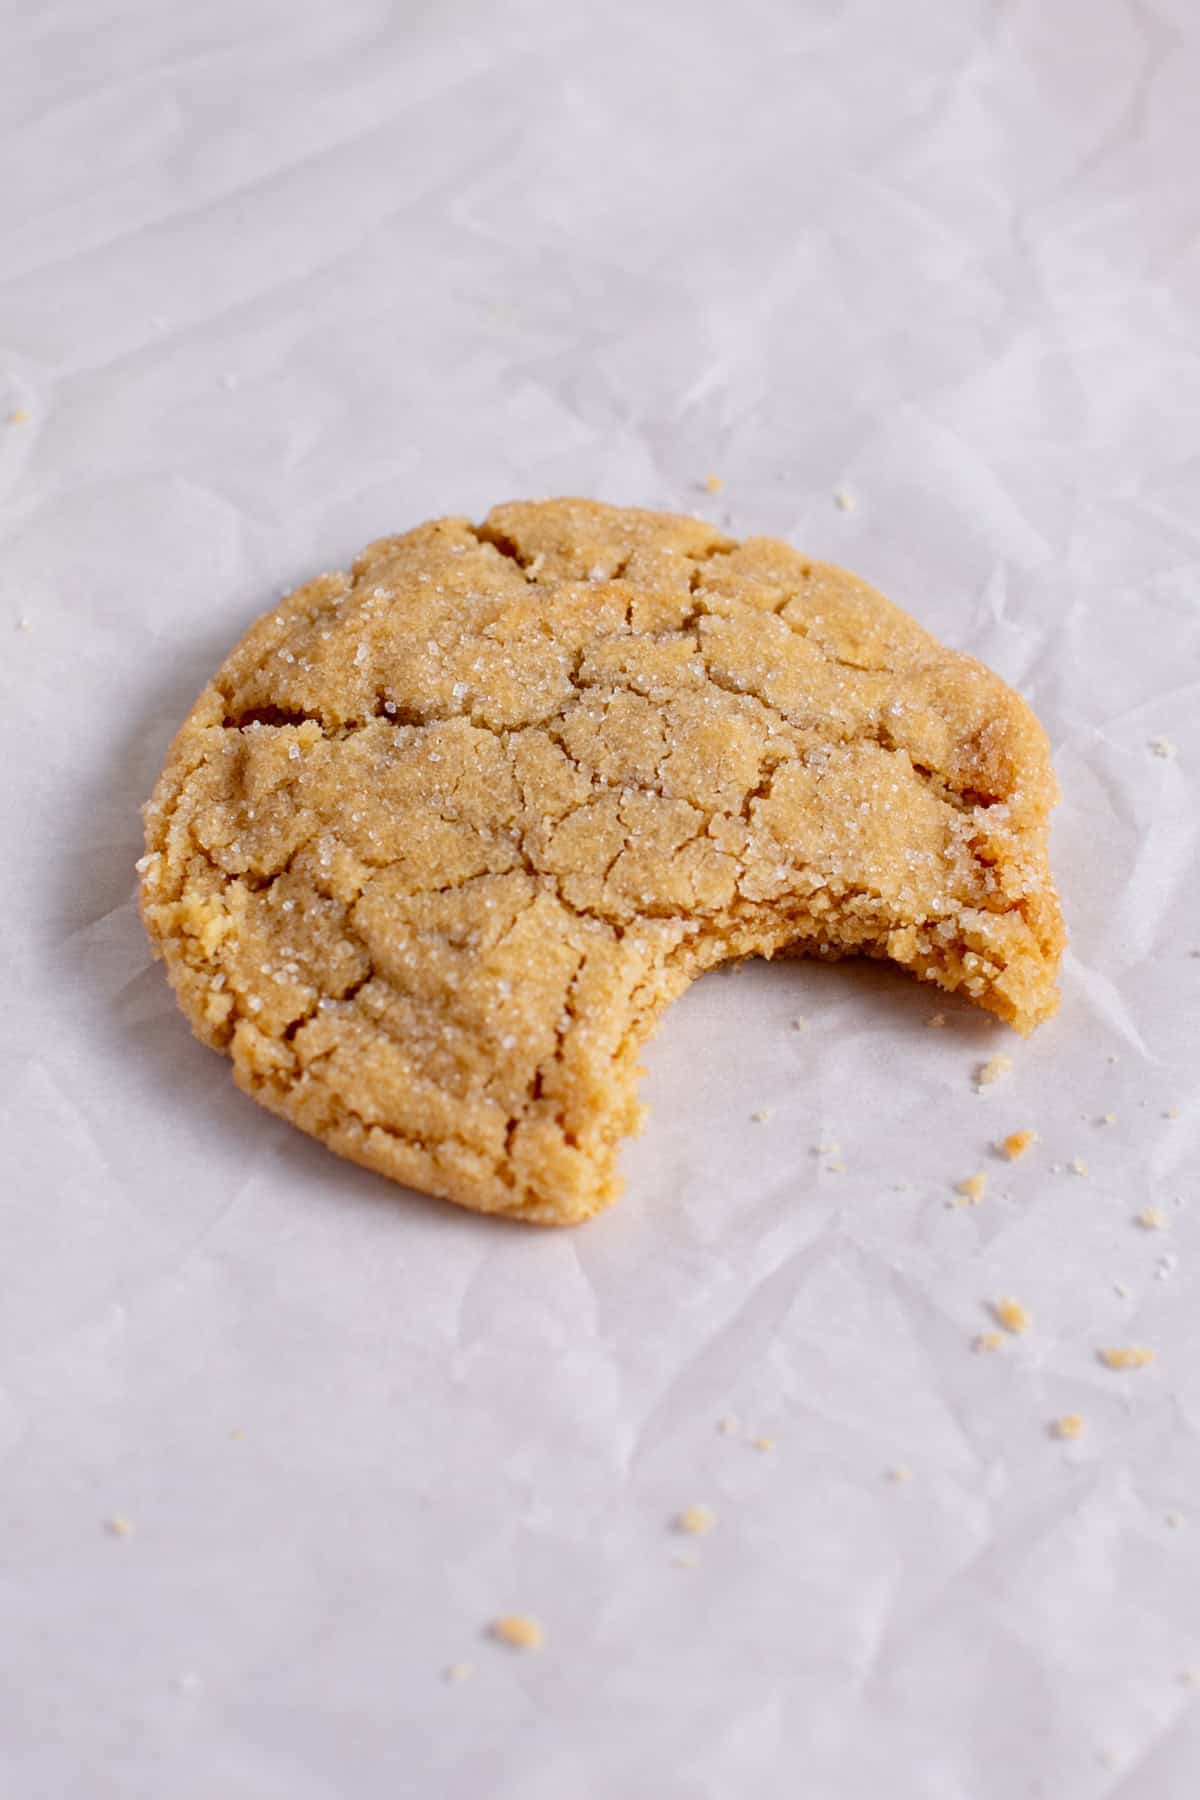 Single Serve Peanut Butter Cookie with a bite missing and some crumbs.